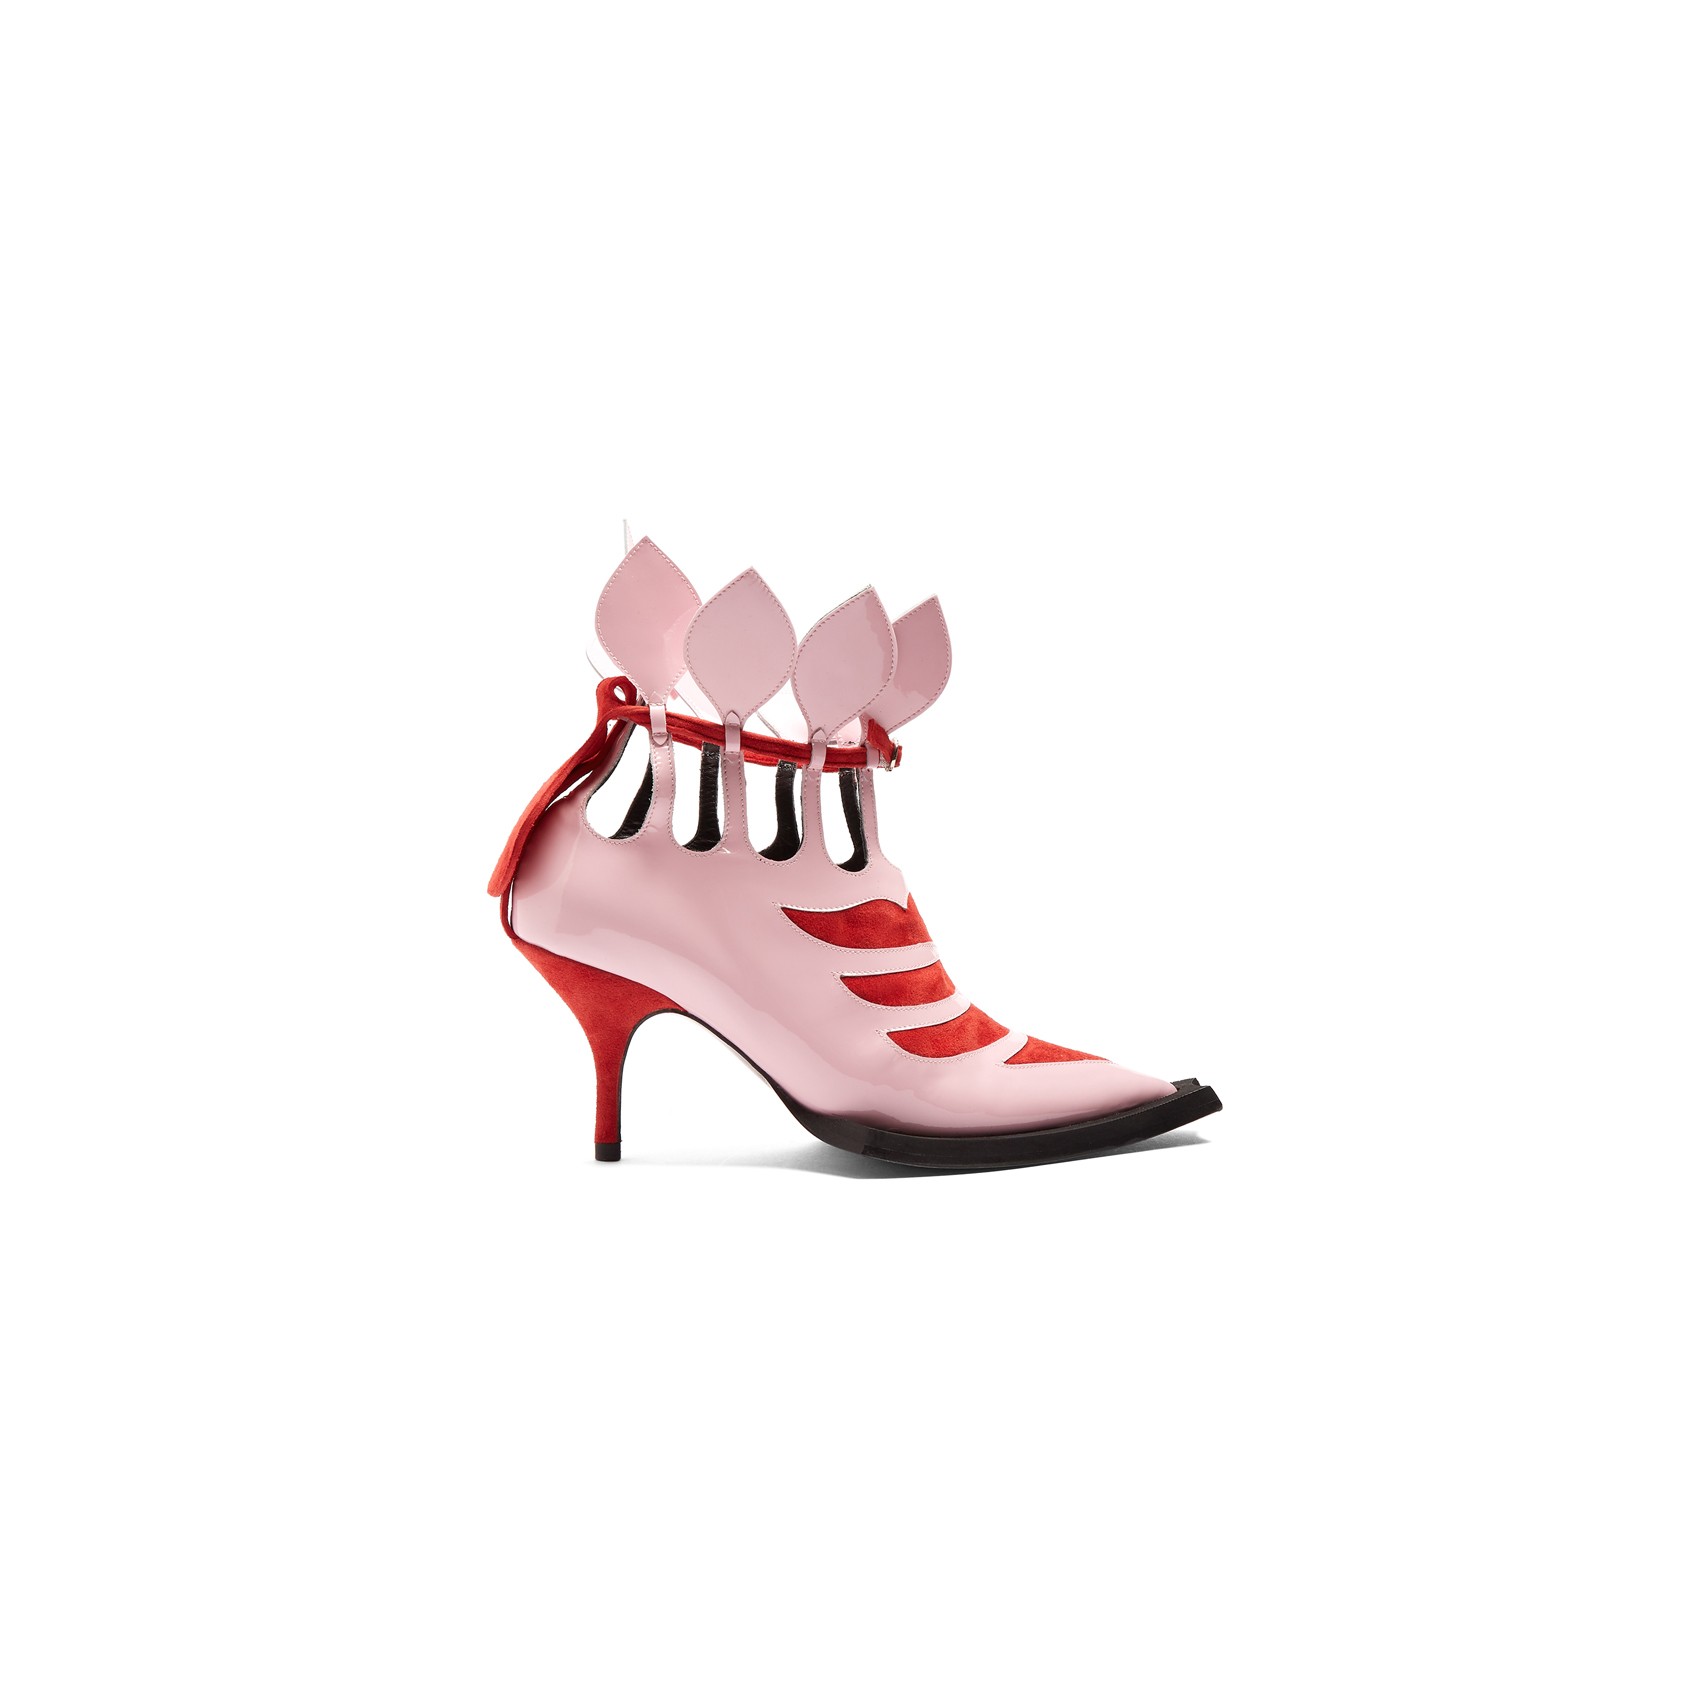 Make heads turn in the pink and red Lydia ankle boots and the oversized Chanel sunglasses